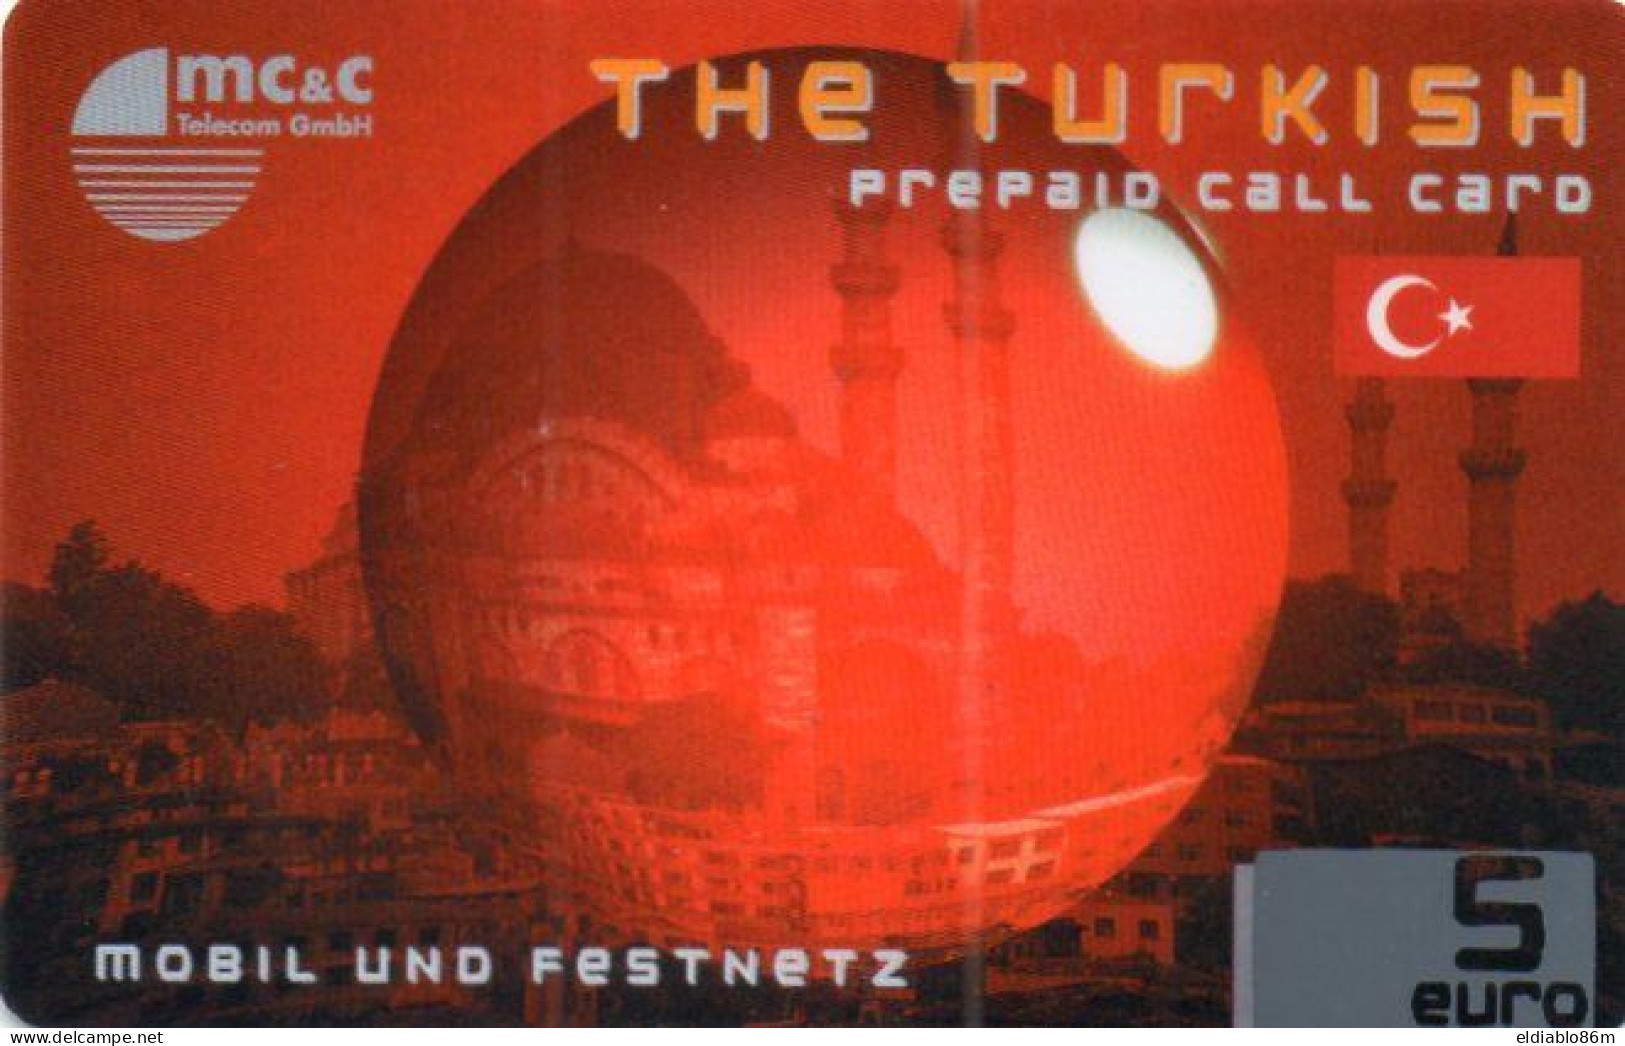 GERMANY - PREPAID - MC & C TELECOM GmbH - THE TURKISH - MOSQUE - TURKEY RELATED - MINT - [2] Mobile Phones, Refills And Prepaid Cards